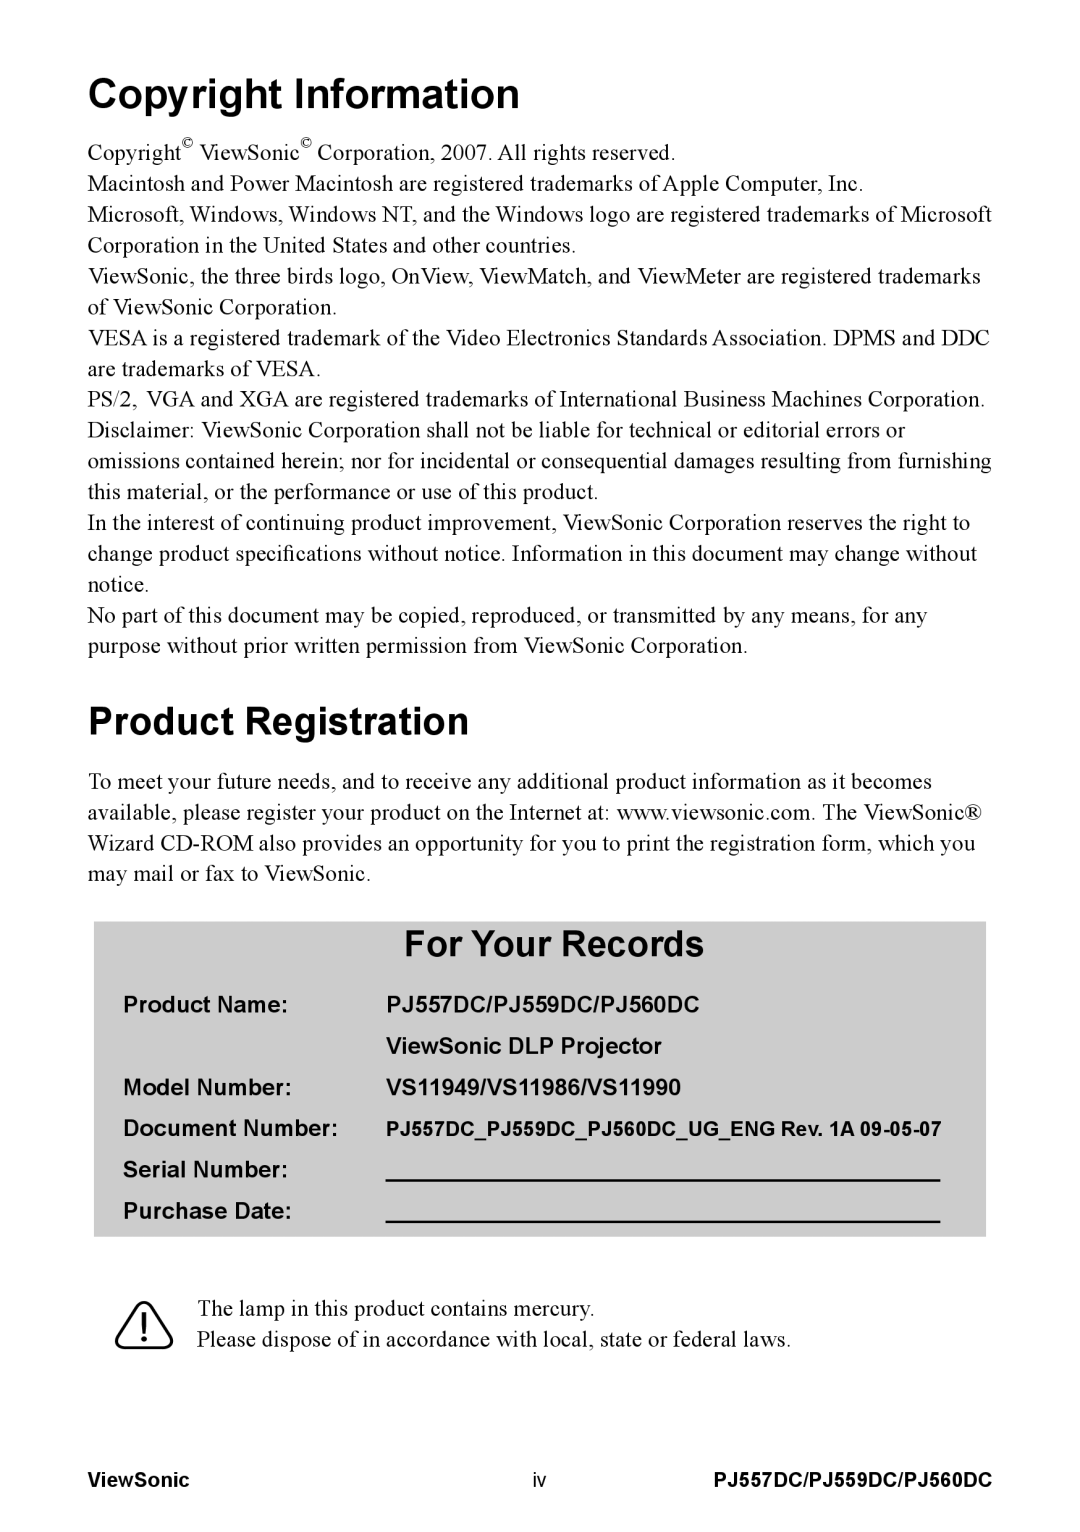 ViewSonic VS11949 Product Registration, Copyright Information, For Your Records, Product Name, PJ557DC/PJ559DC/PJ560DC 